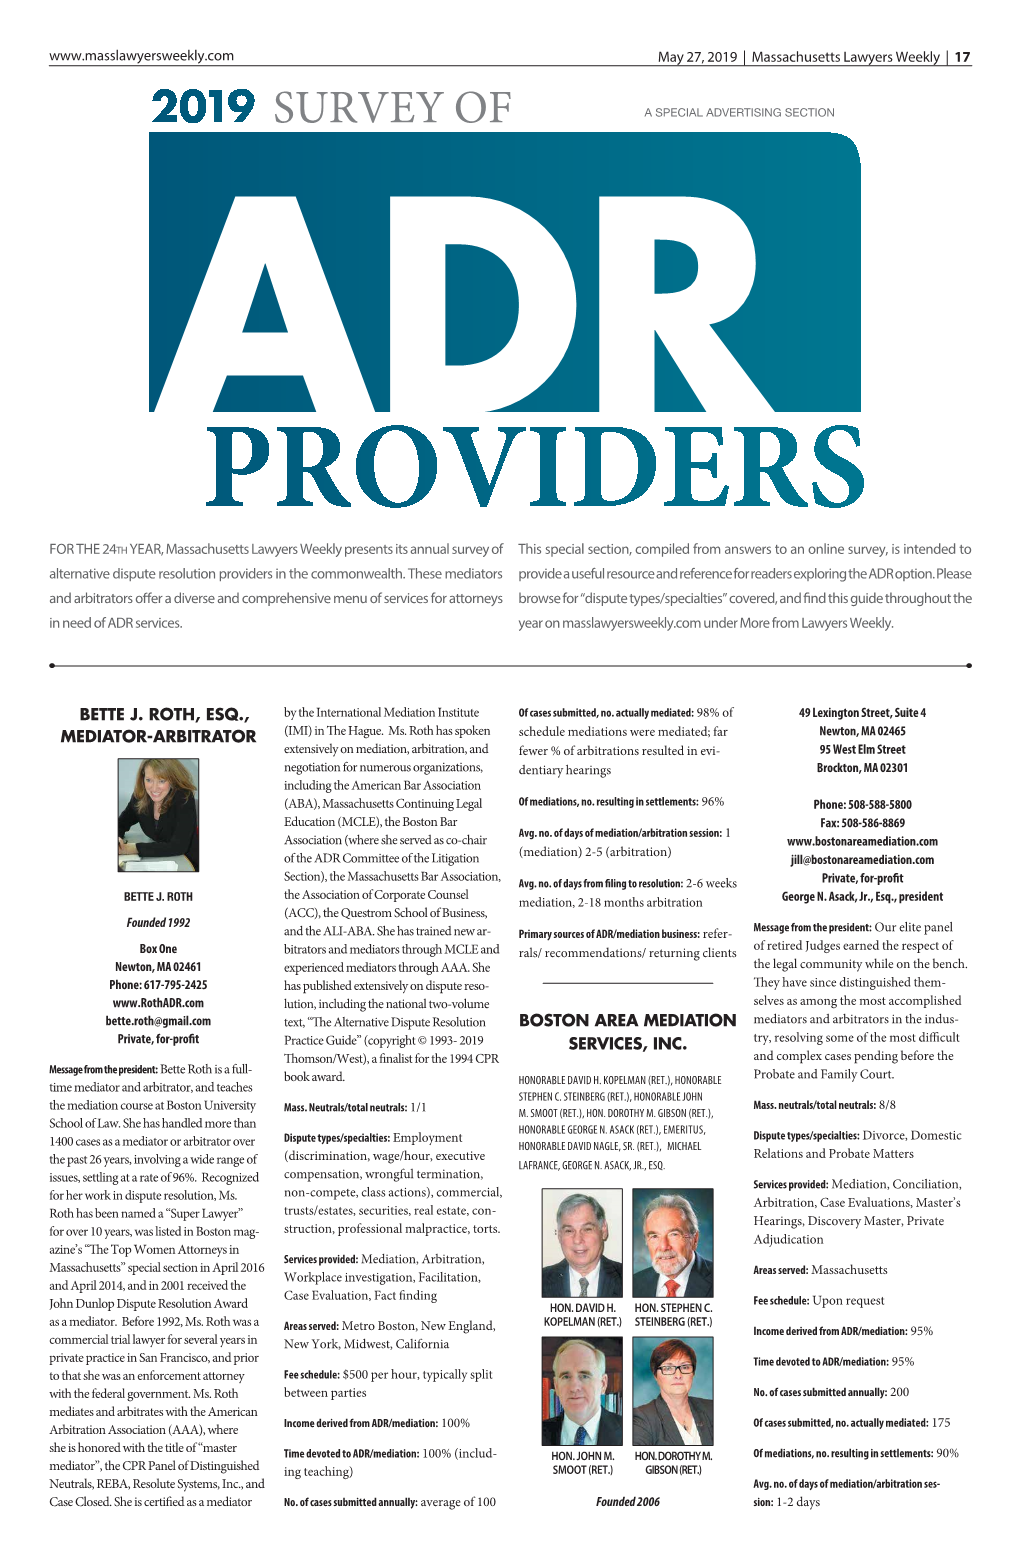 Annual 2019 Survey of ADR Providers